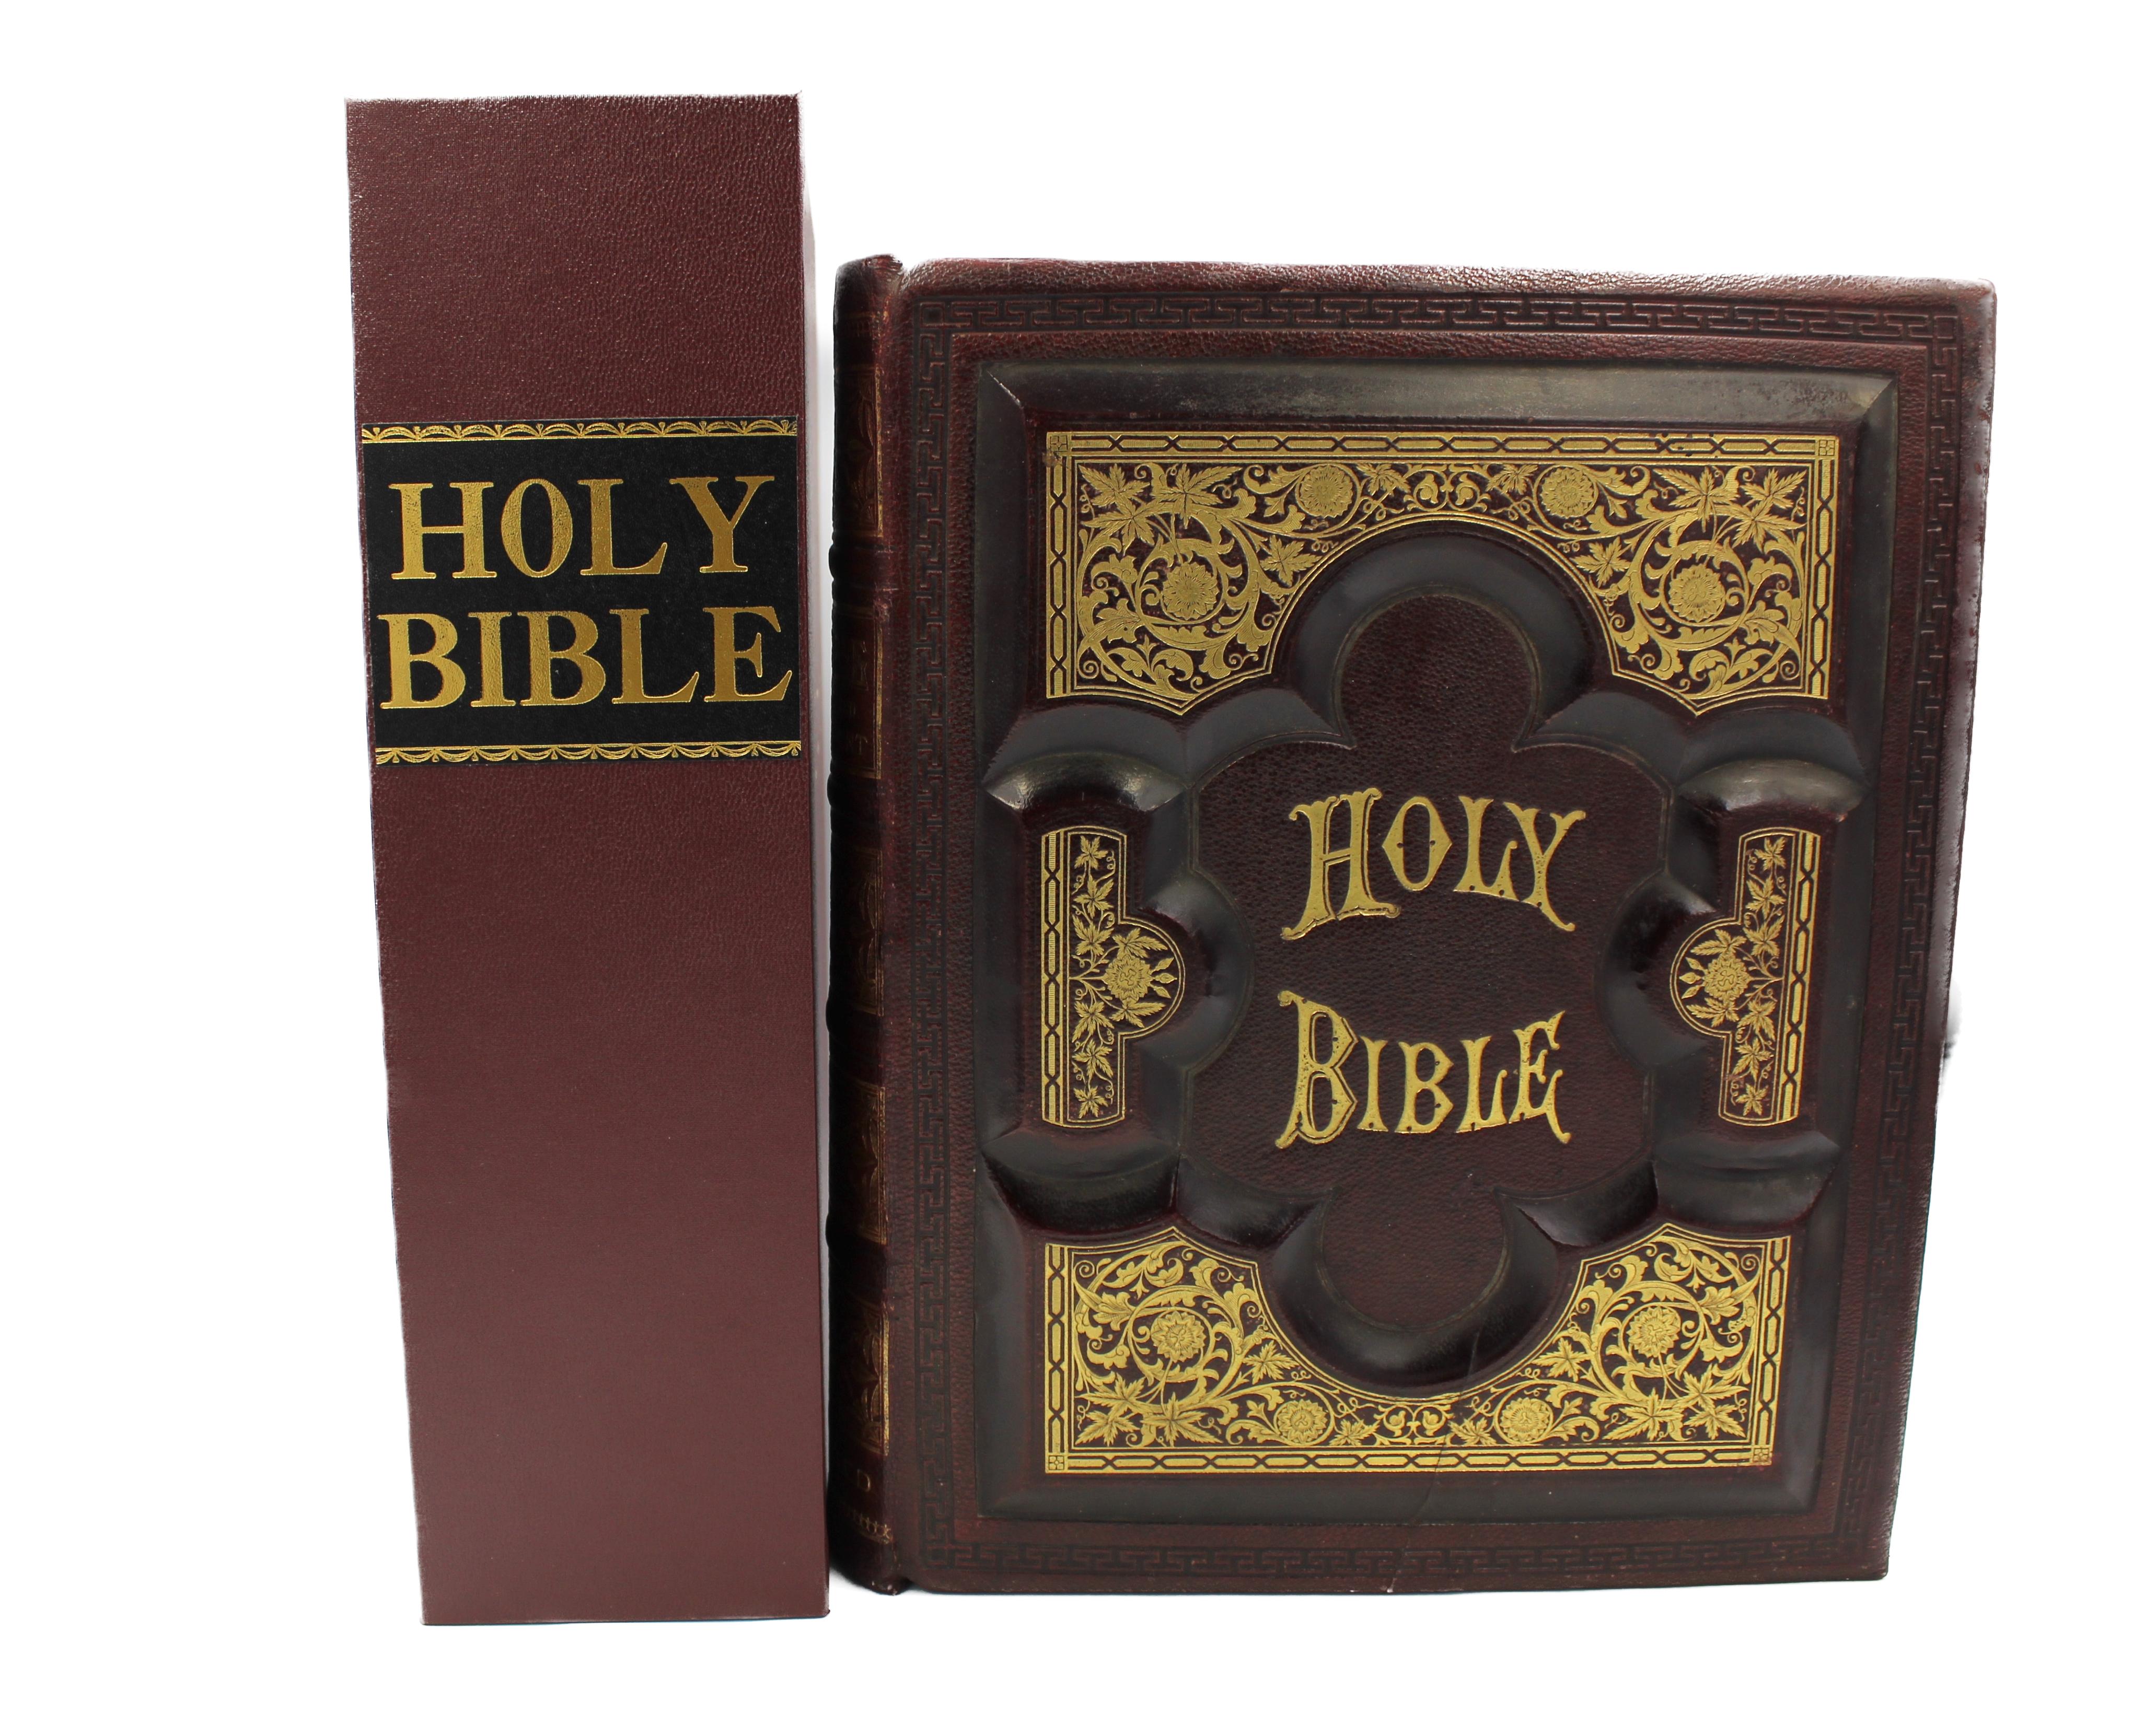 Hand-Carved The Holy Bible, Containing the Old and New Testaments, Illustrated, 1885